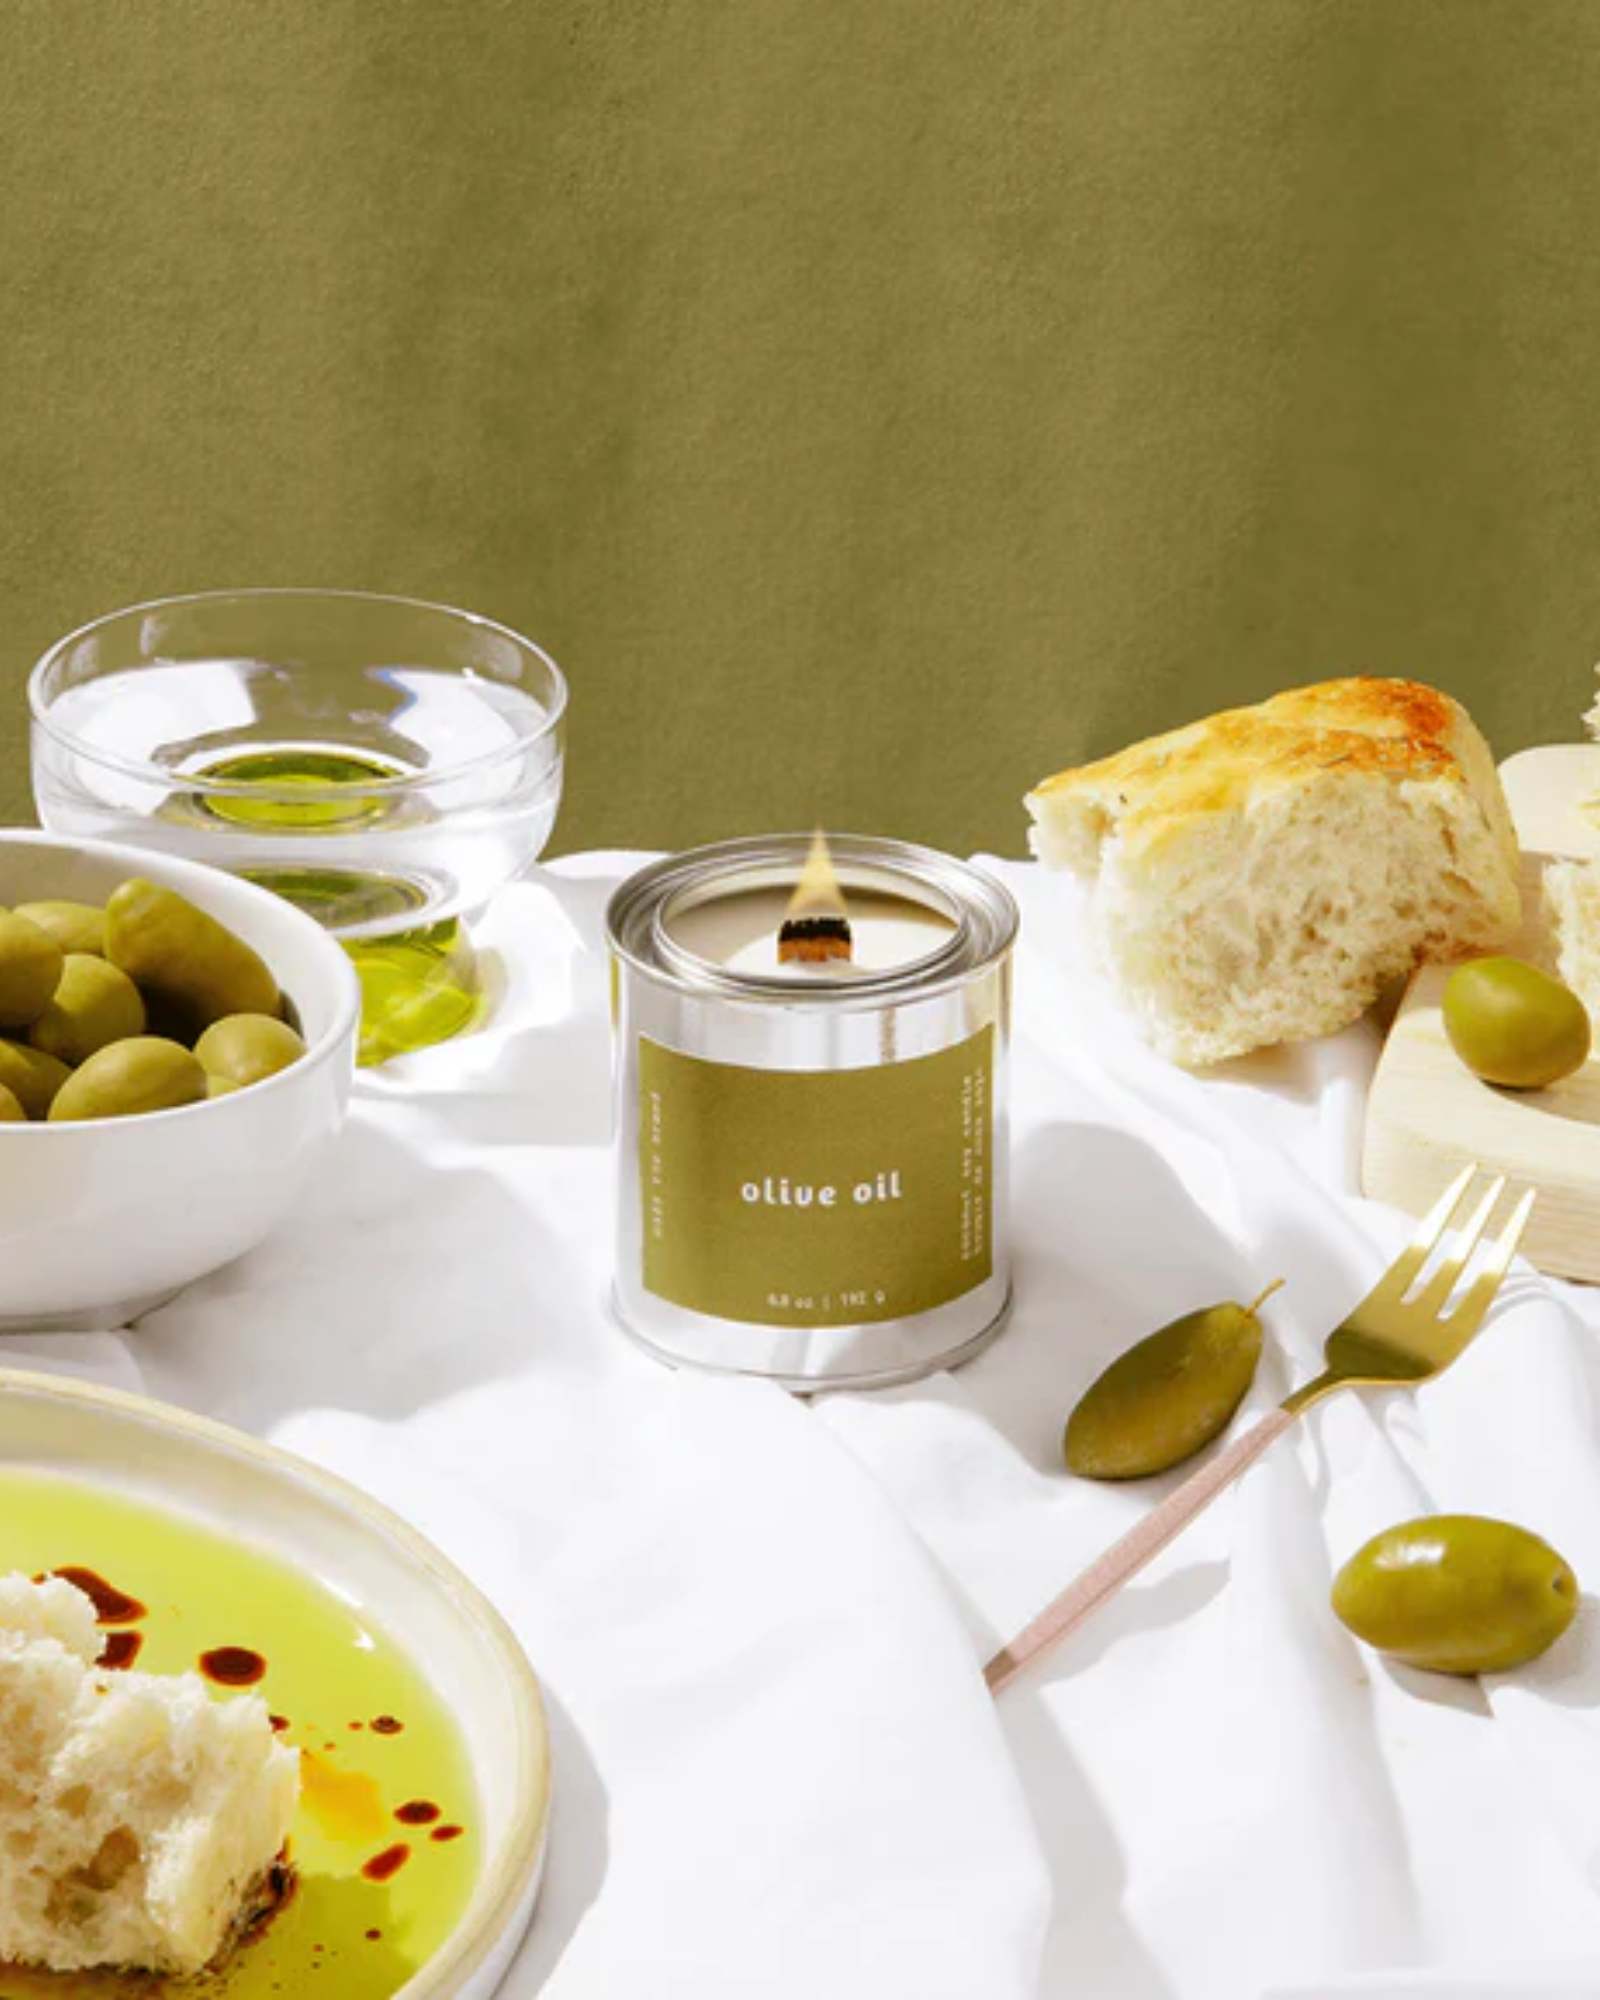 OLIVE OIL 8OZ - CANDLE